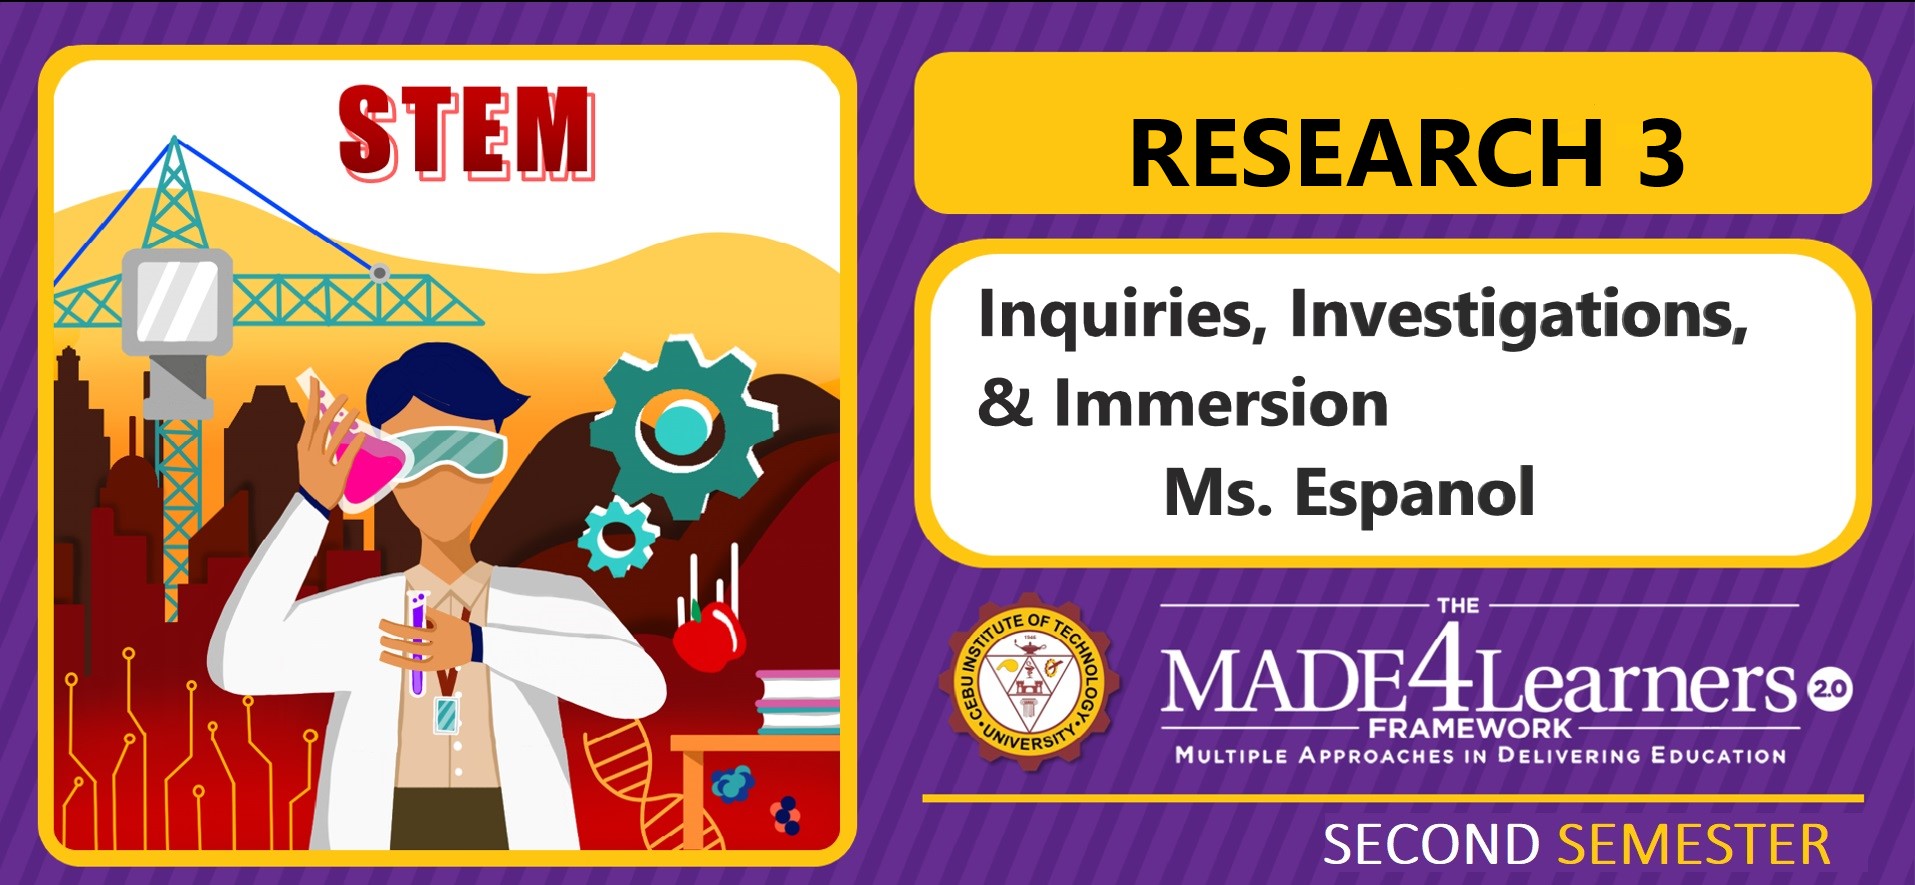 RES3: Research Inquiries, Investigation and Immersion (Español)